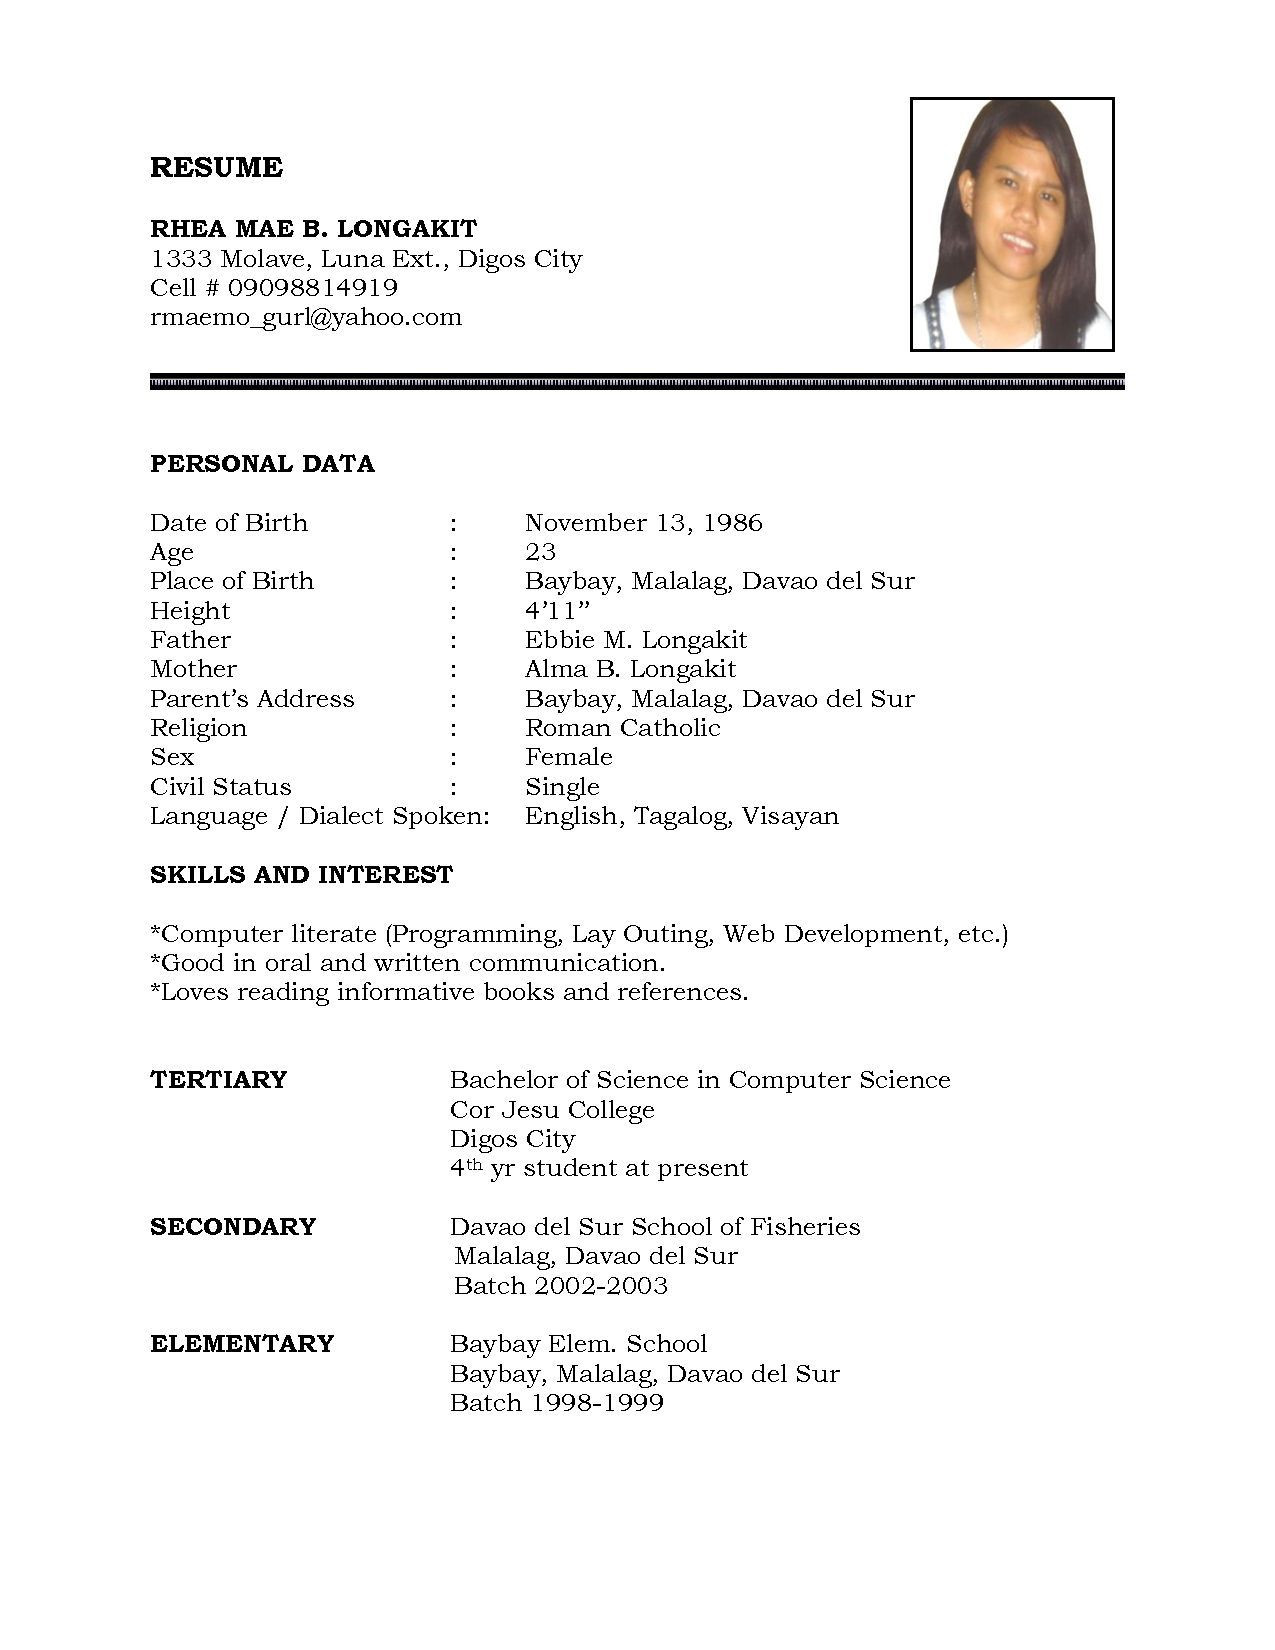 Sample Of Best Resume for Job Application Pin by Laurie Koitzsch Quick On Carissa B. Hernandez Job Resume …